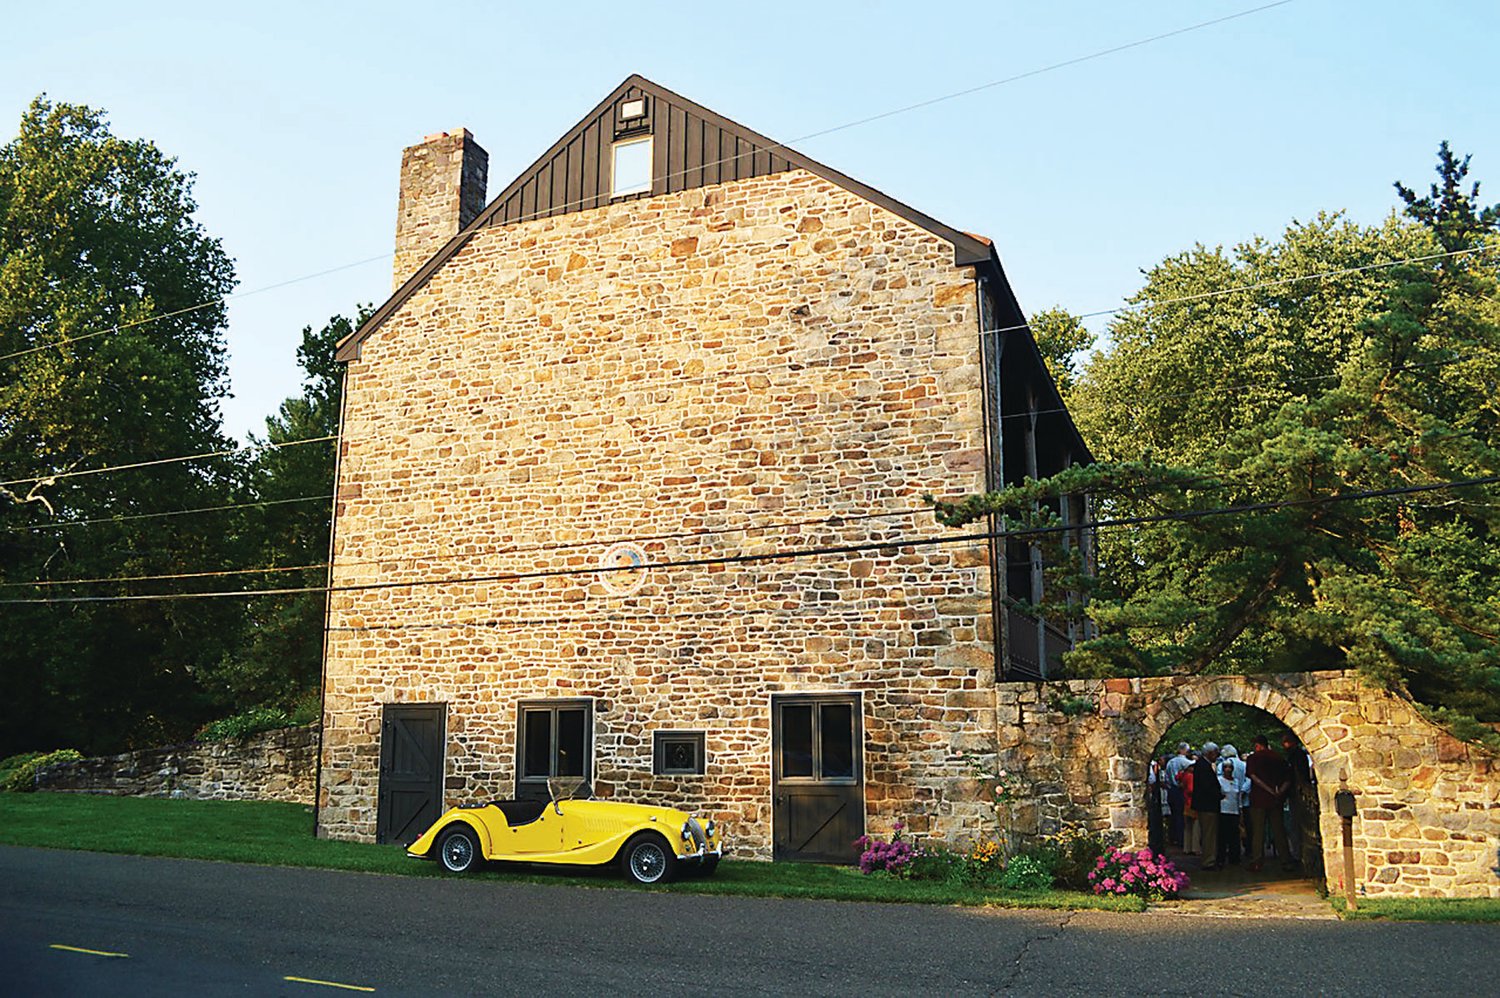 The Fowles residence, a converted barn. Guests gathered inside the courtyard.